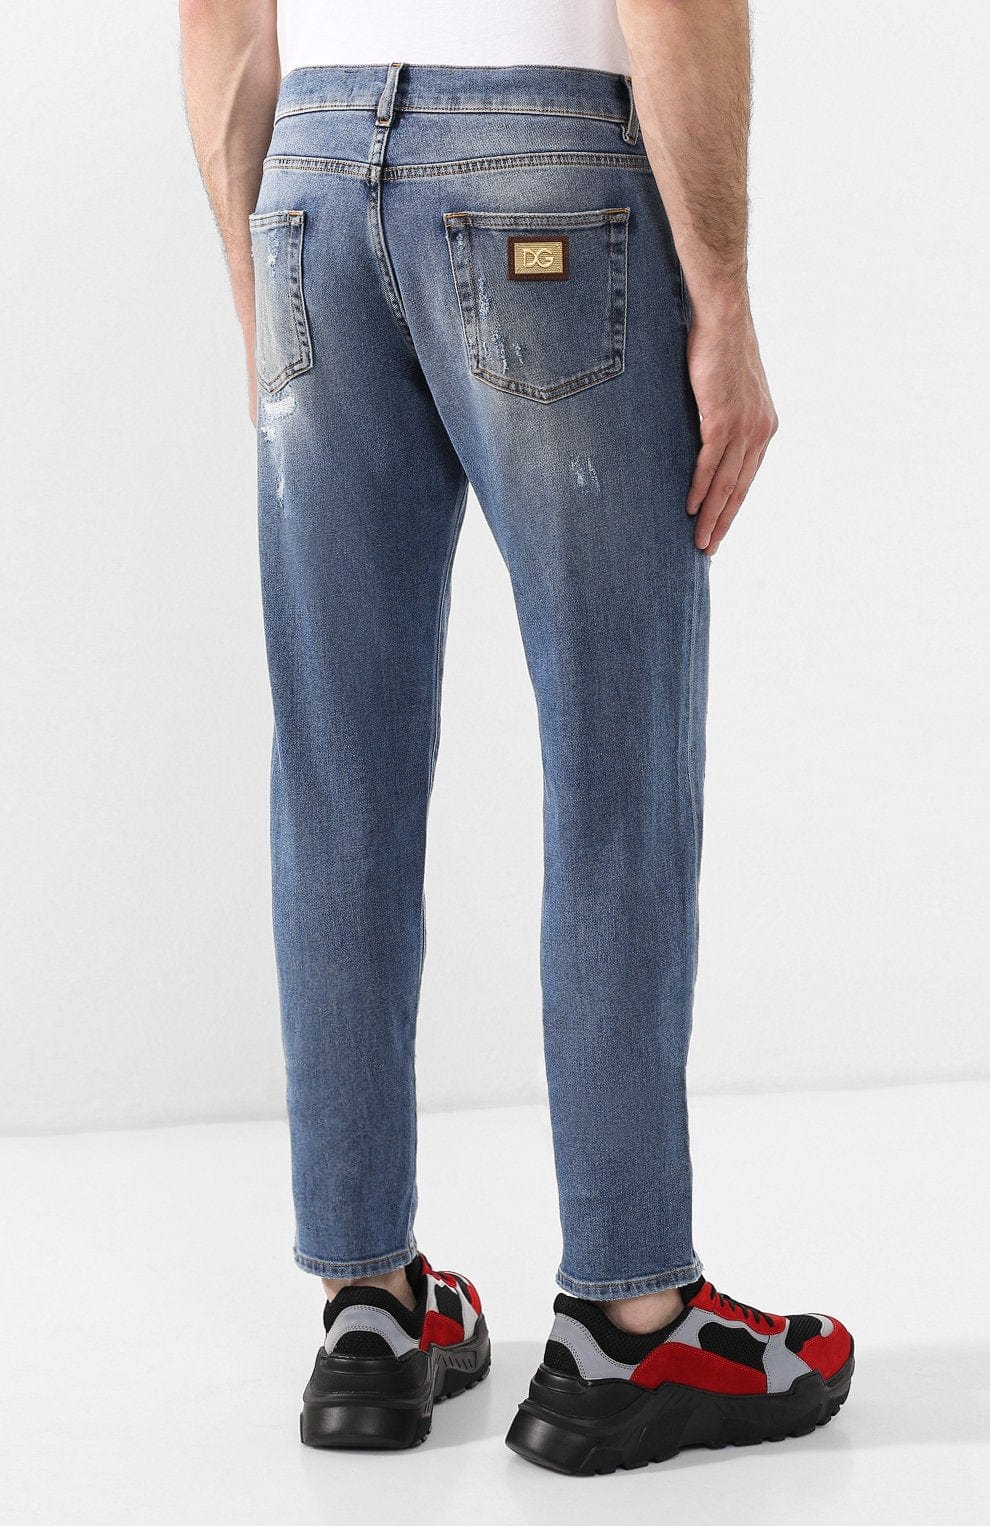 Dolce & Gabbana Light Slim-Fit Stretch Jeans With Rips